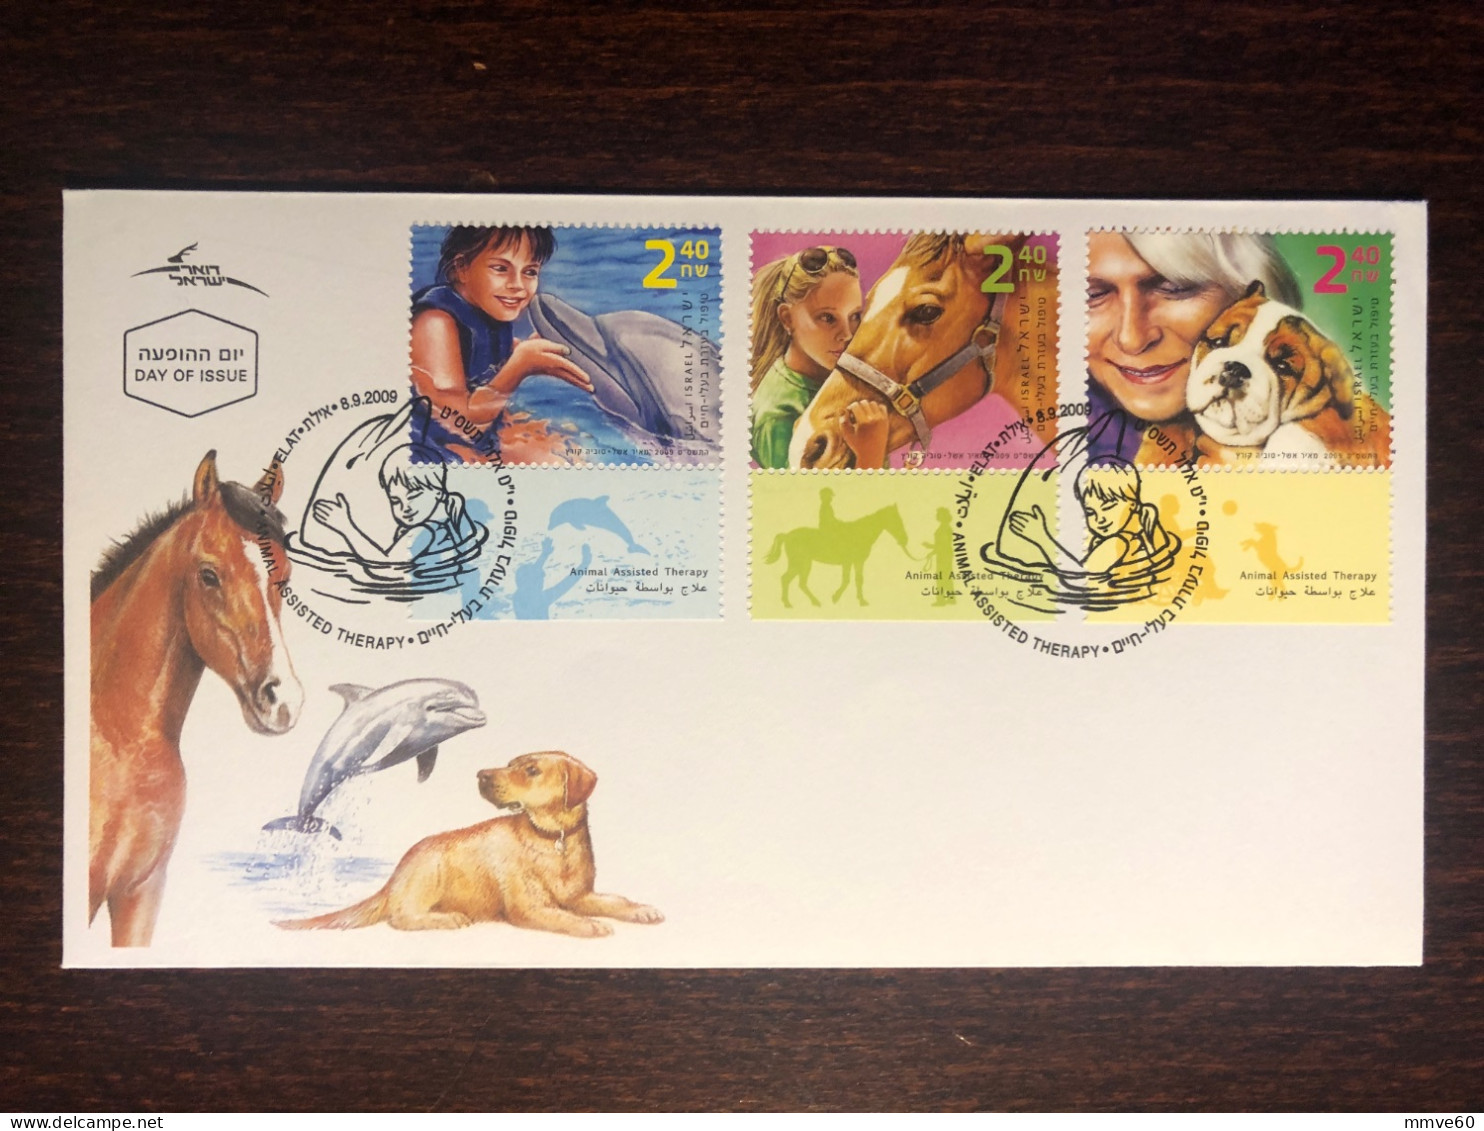 ISRAEL FDC COVER 2009 YEAR VETERINARY HEALTH MEDICINE STAMPS - FDC